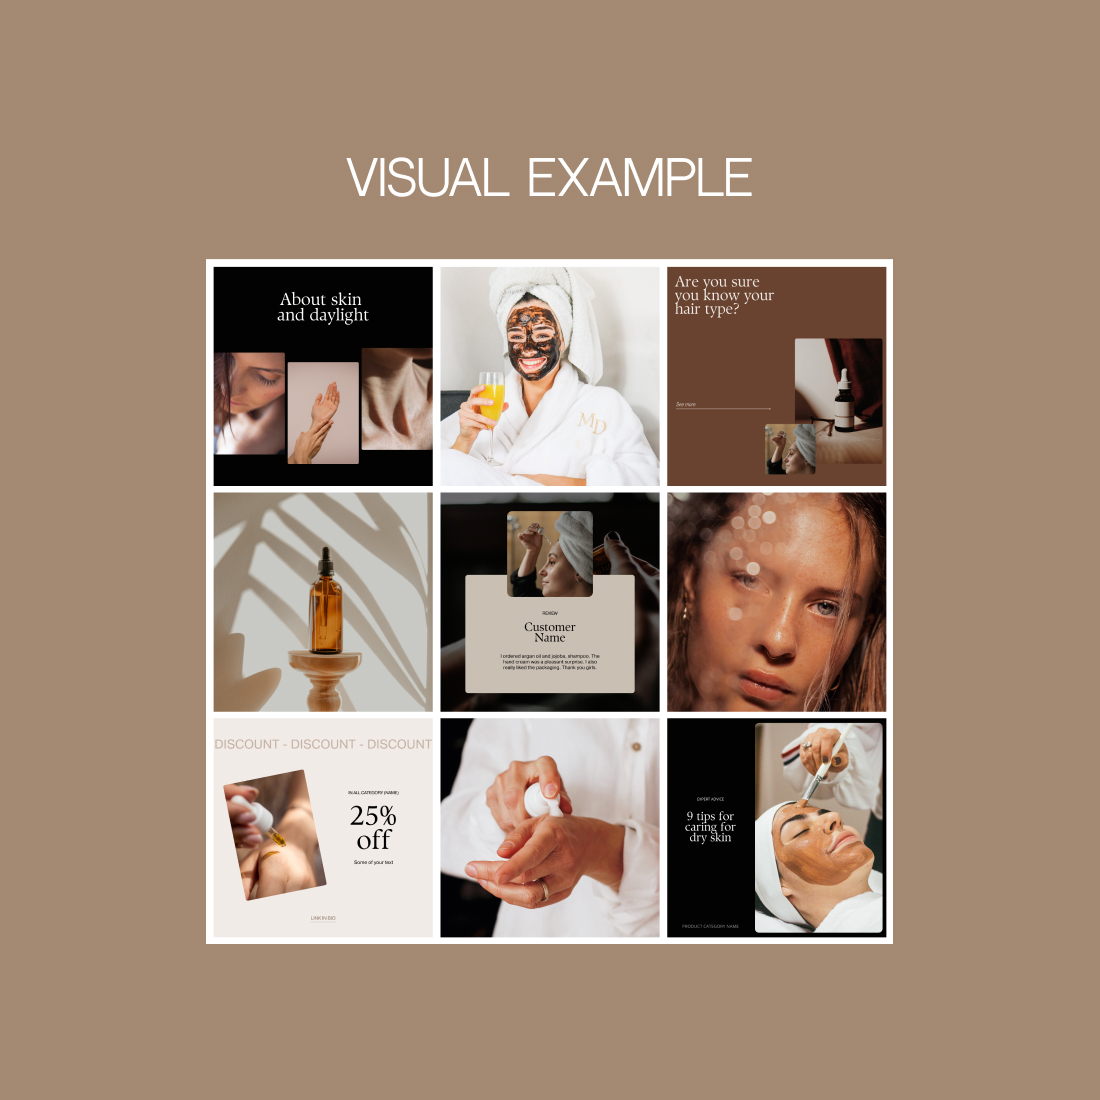 Modern Instagram Feed Templates for the Beauty Industry cover image.